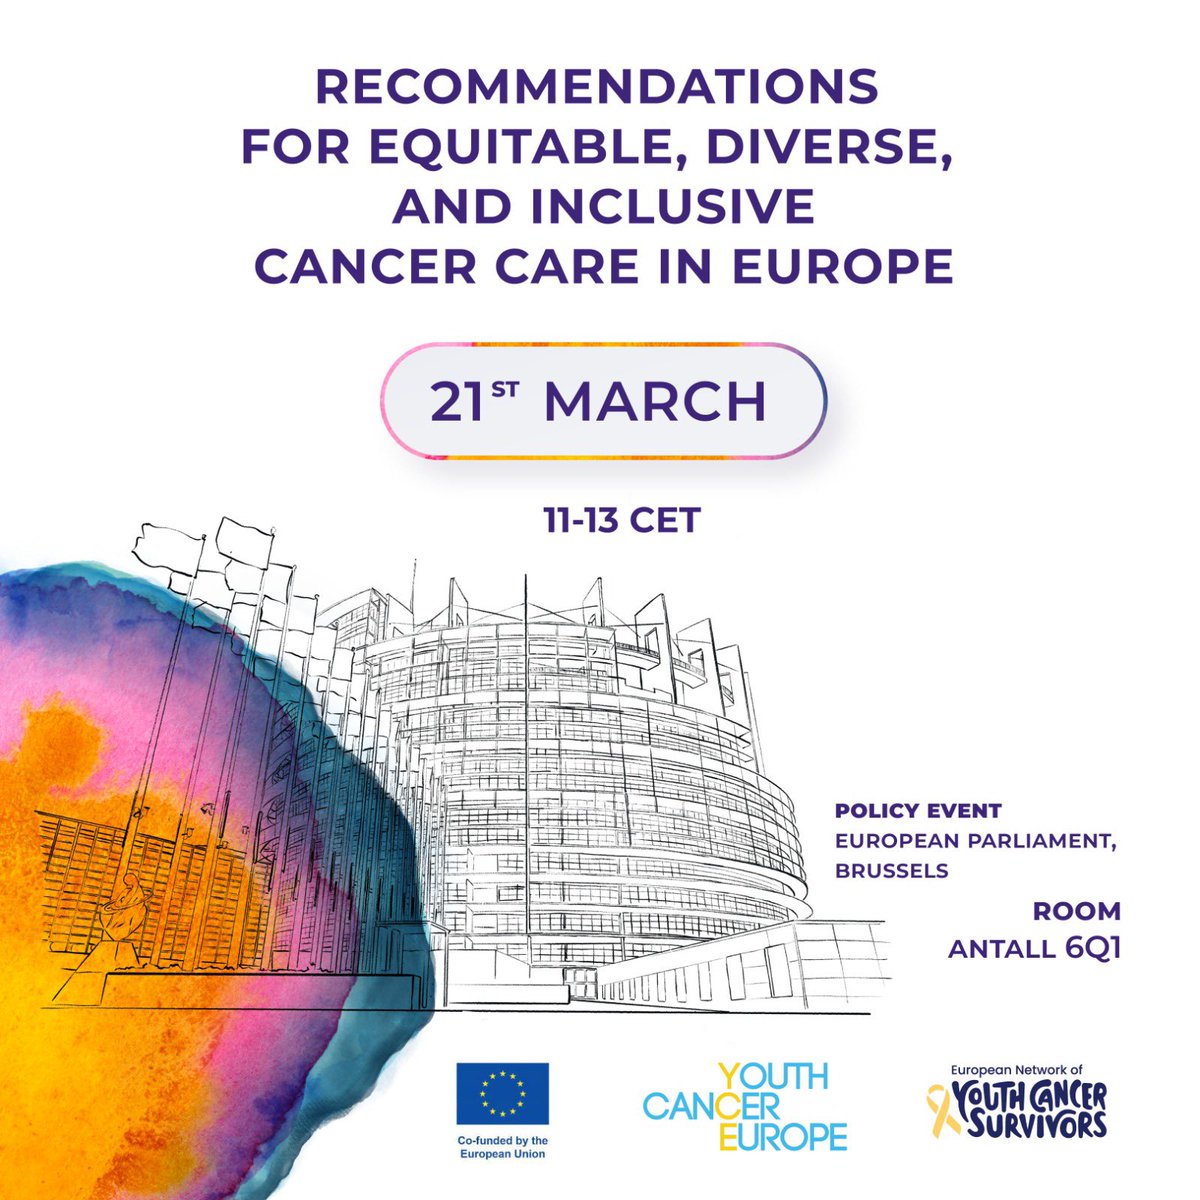 ❗Save the Date: March 21, 2024 🗓️ Join @CancerEurope at the European Parliament, Brussels for the launch of our “Recommendations for Equitable, Diverse and Inclusive Cancer Care in Europe” Policy Paper 🤩 👉 Register now here so we can save you a spot: forms.gle/s4NByUy7fY6bTY…